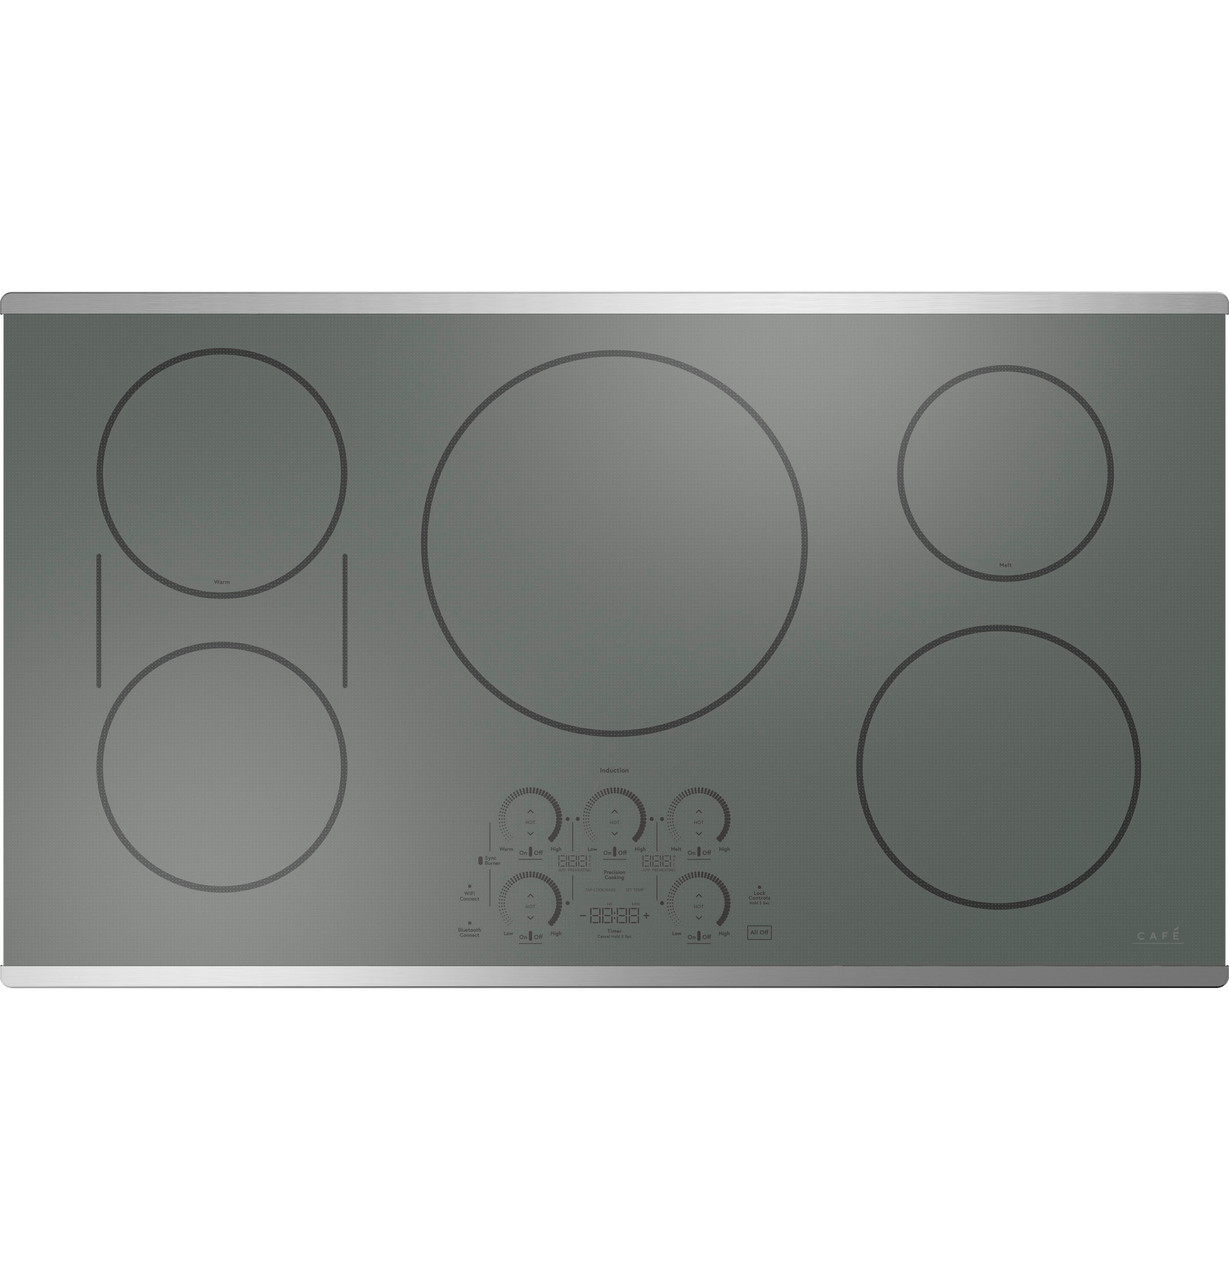 Cooktop Mat Convenient Easy to Clean Induction Stove Silicone Mat